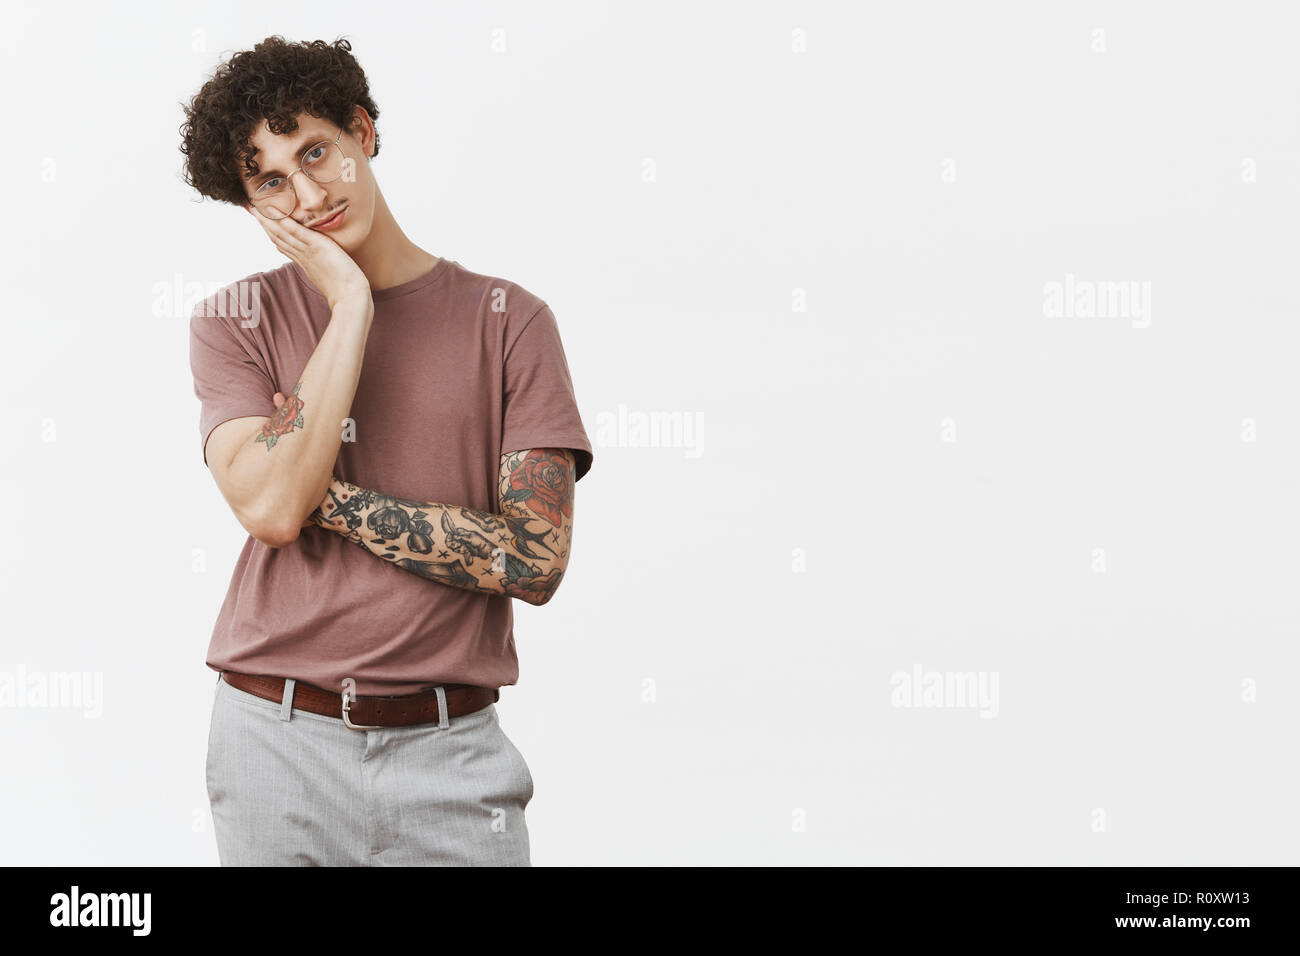 Guy hates sitting at home without action. Portrait of bored handsome and stylish urban young male with moustache, tattooed arm and curly hair leaning on palm indifferent and gloomy Stock Photo